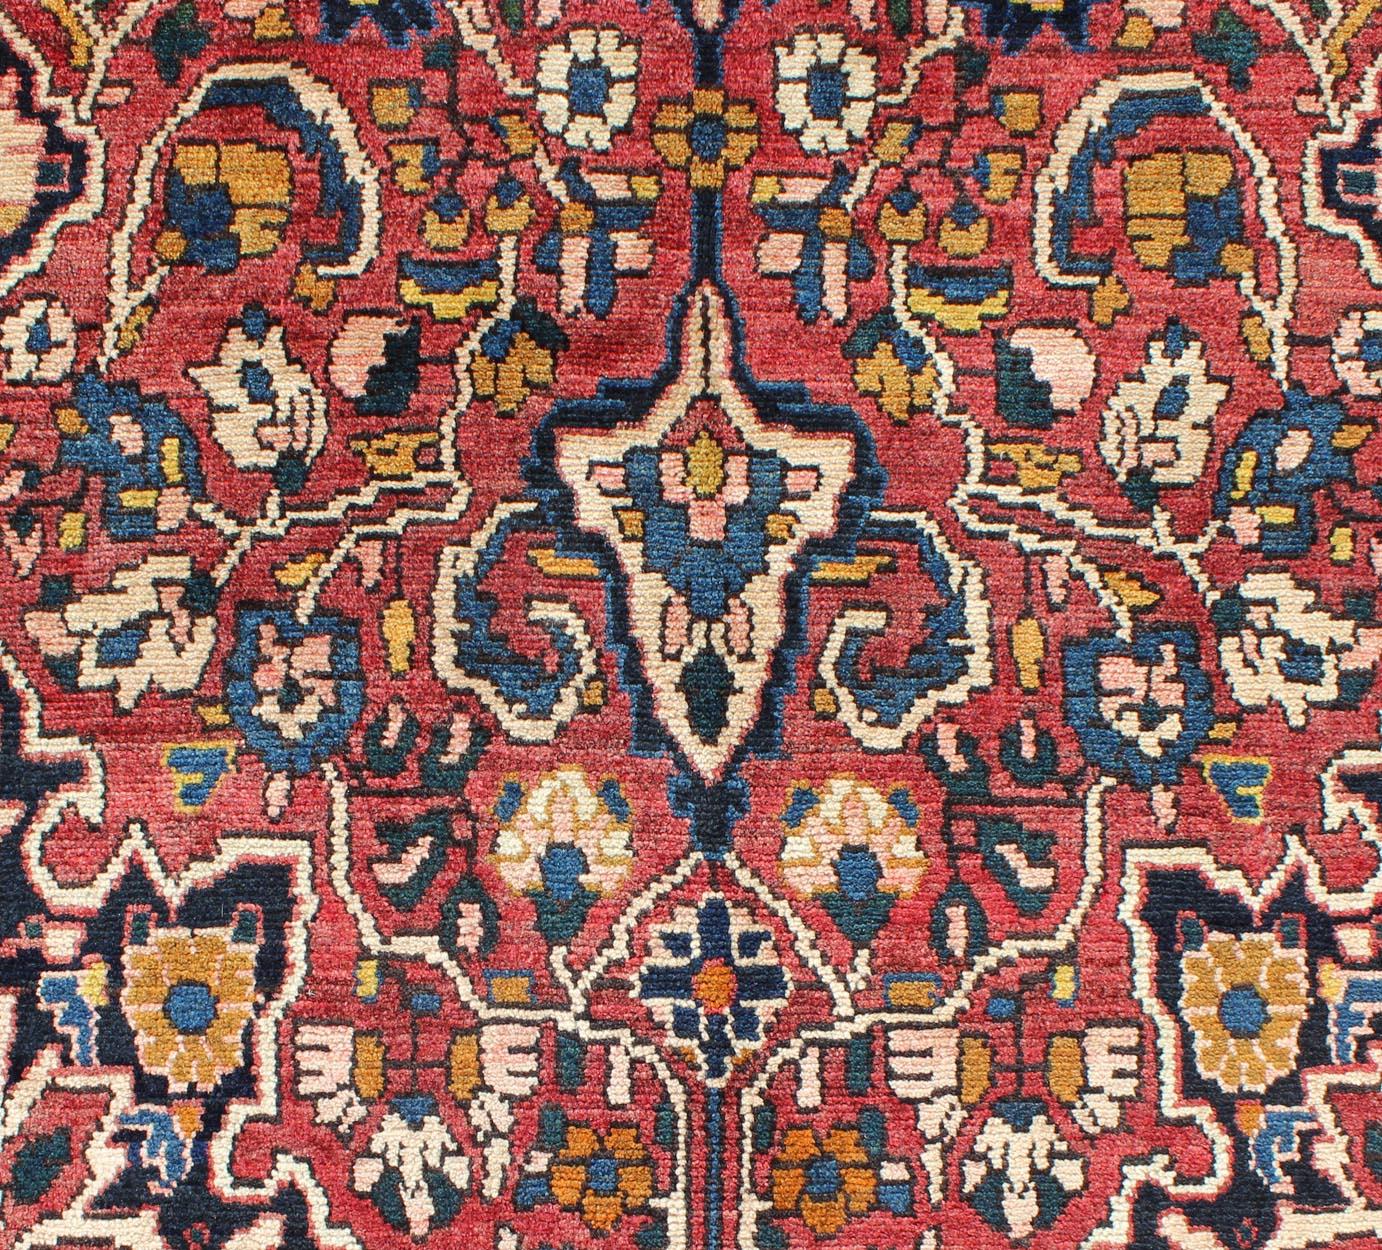 Mid-20th Century Vintage Persian Bakhtiari Rug with Floral Medallion Design in Red